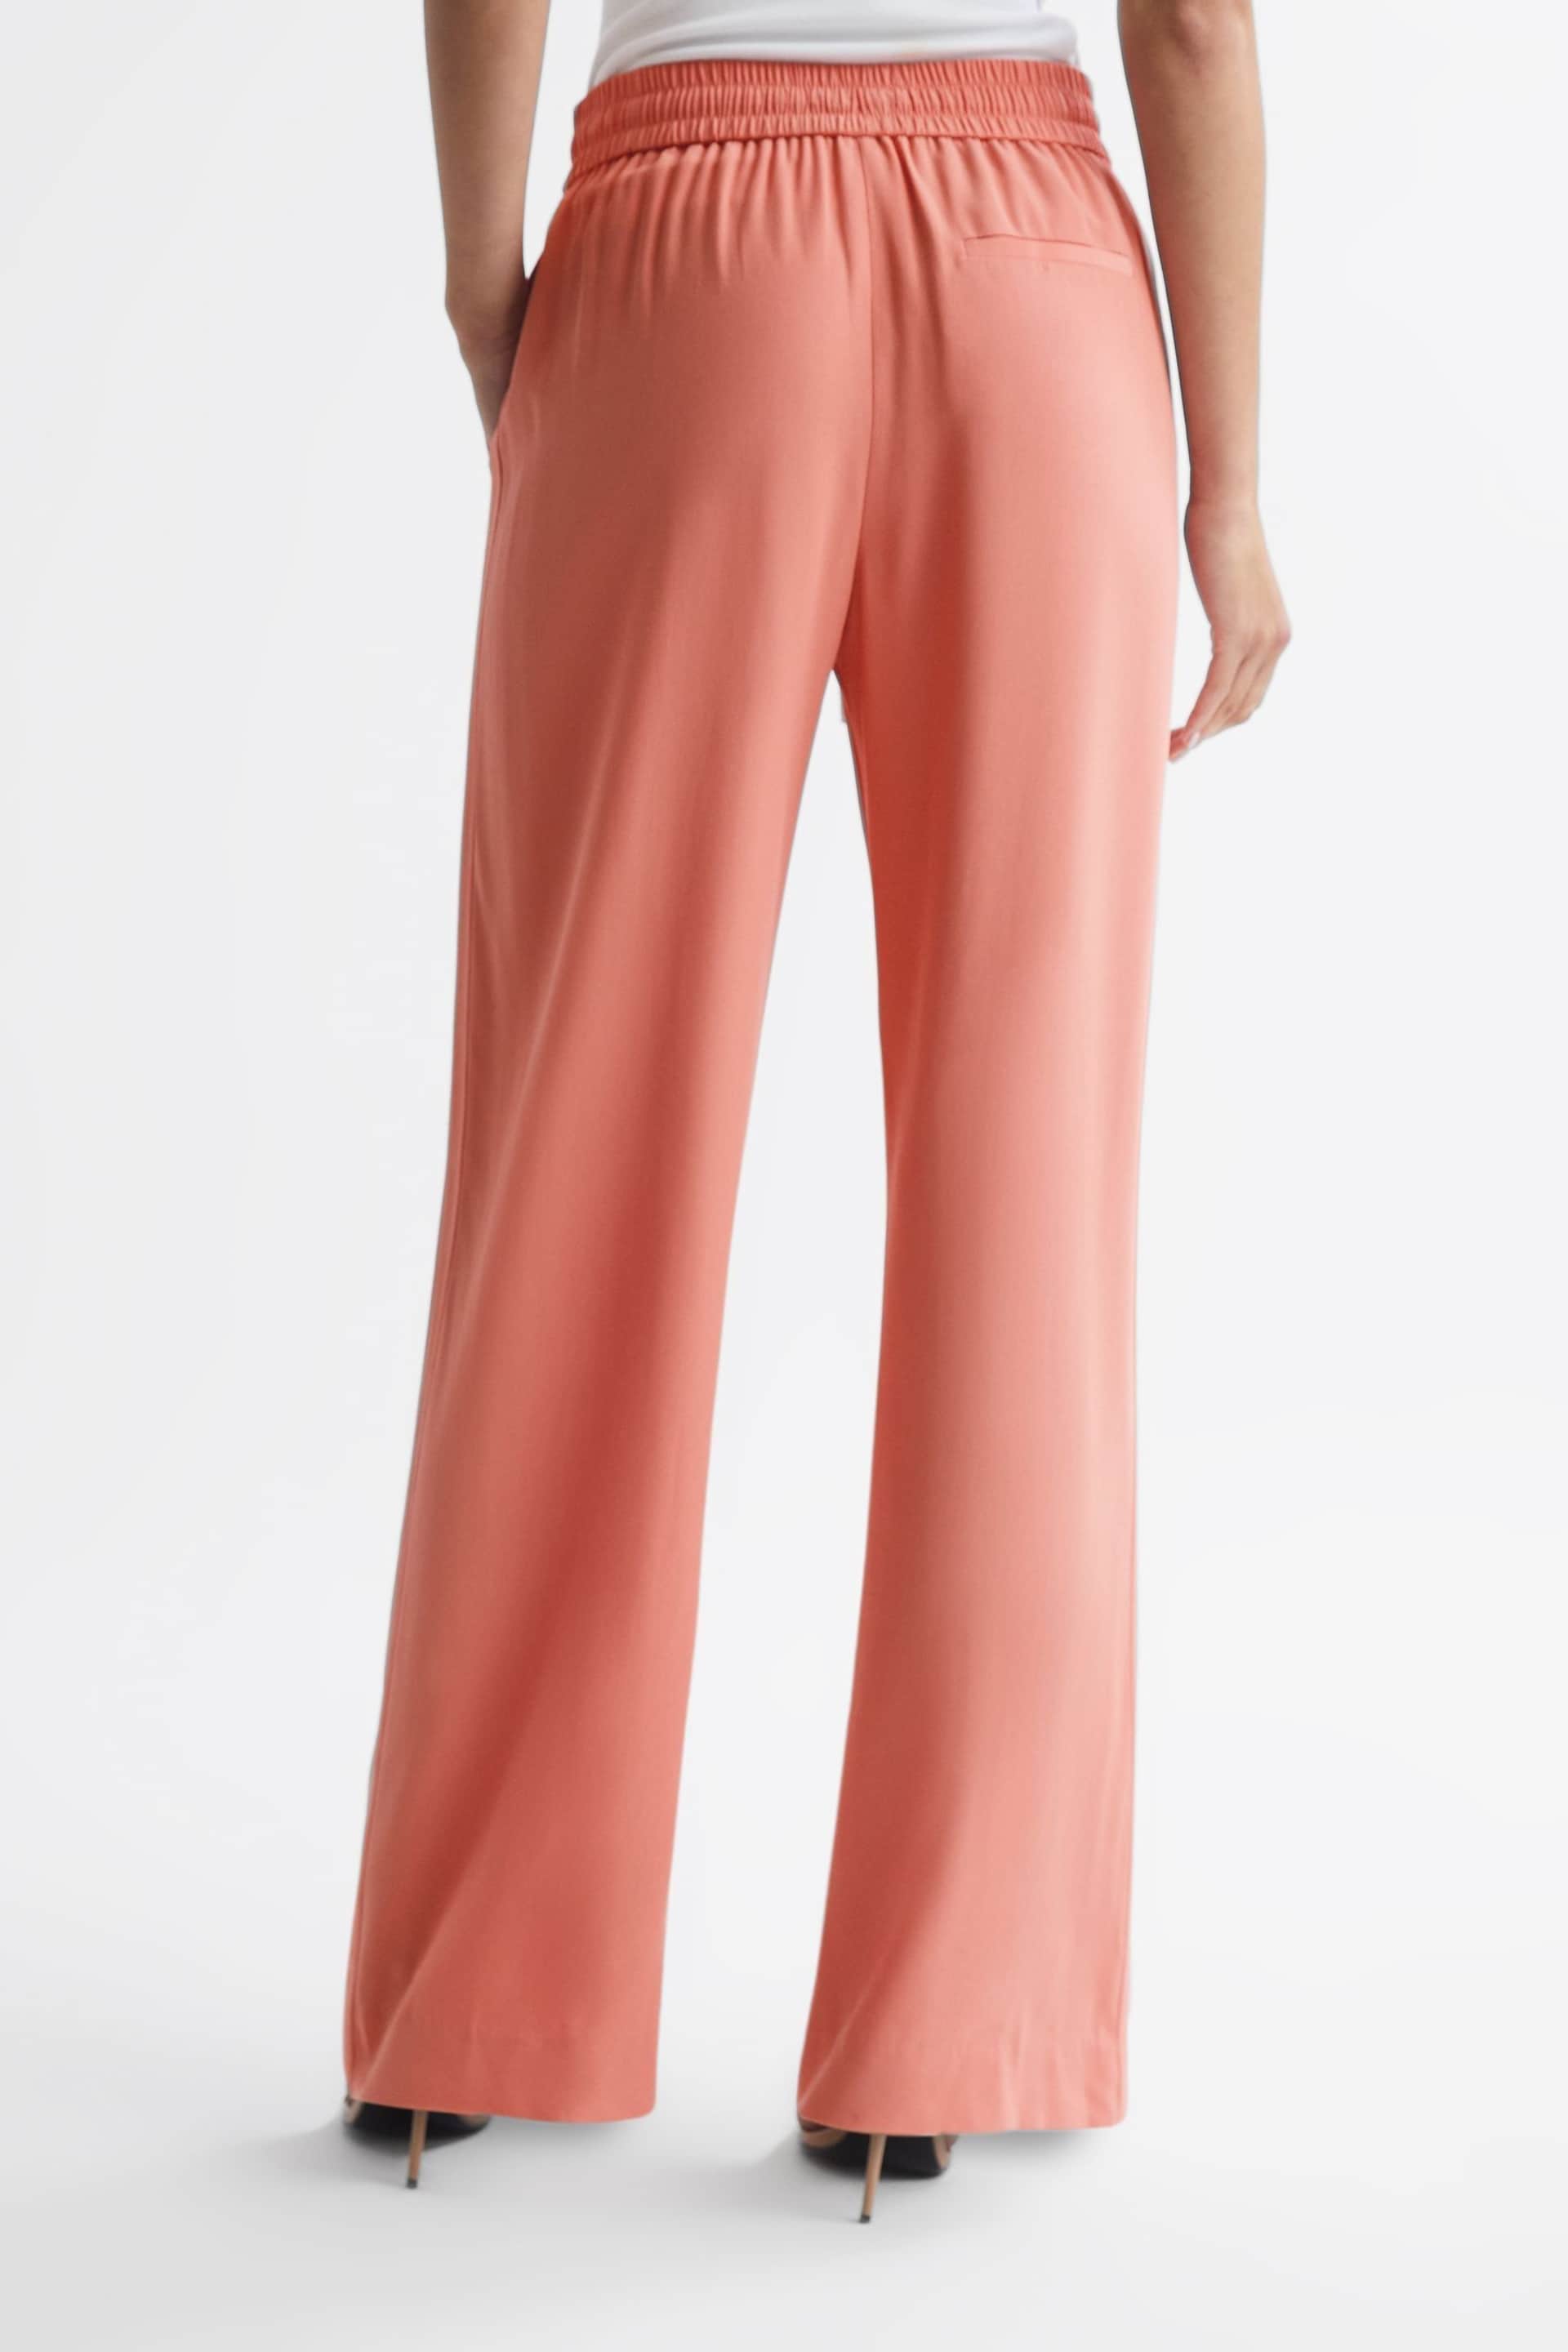 Reiss Pink Mina Wide Leg Trousers - Image 5 of 7